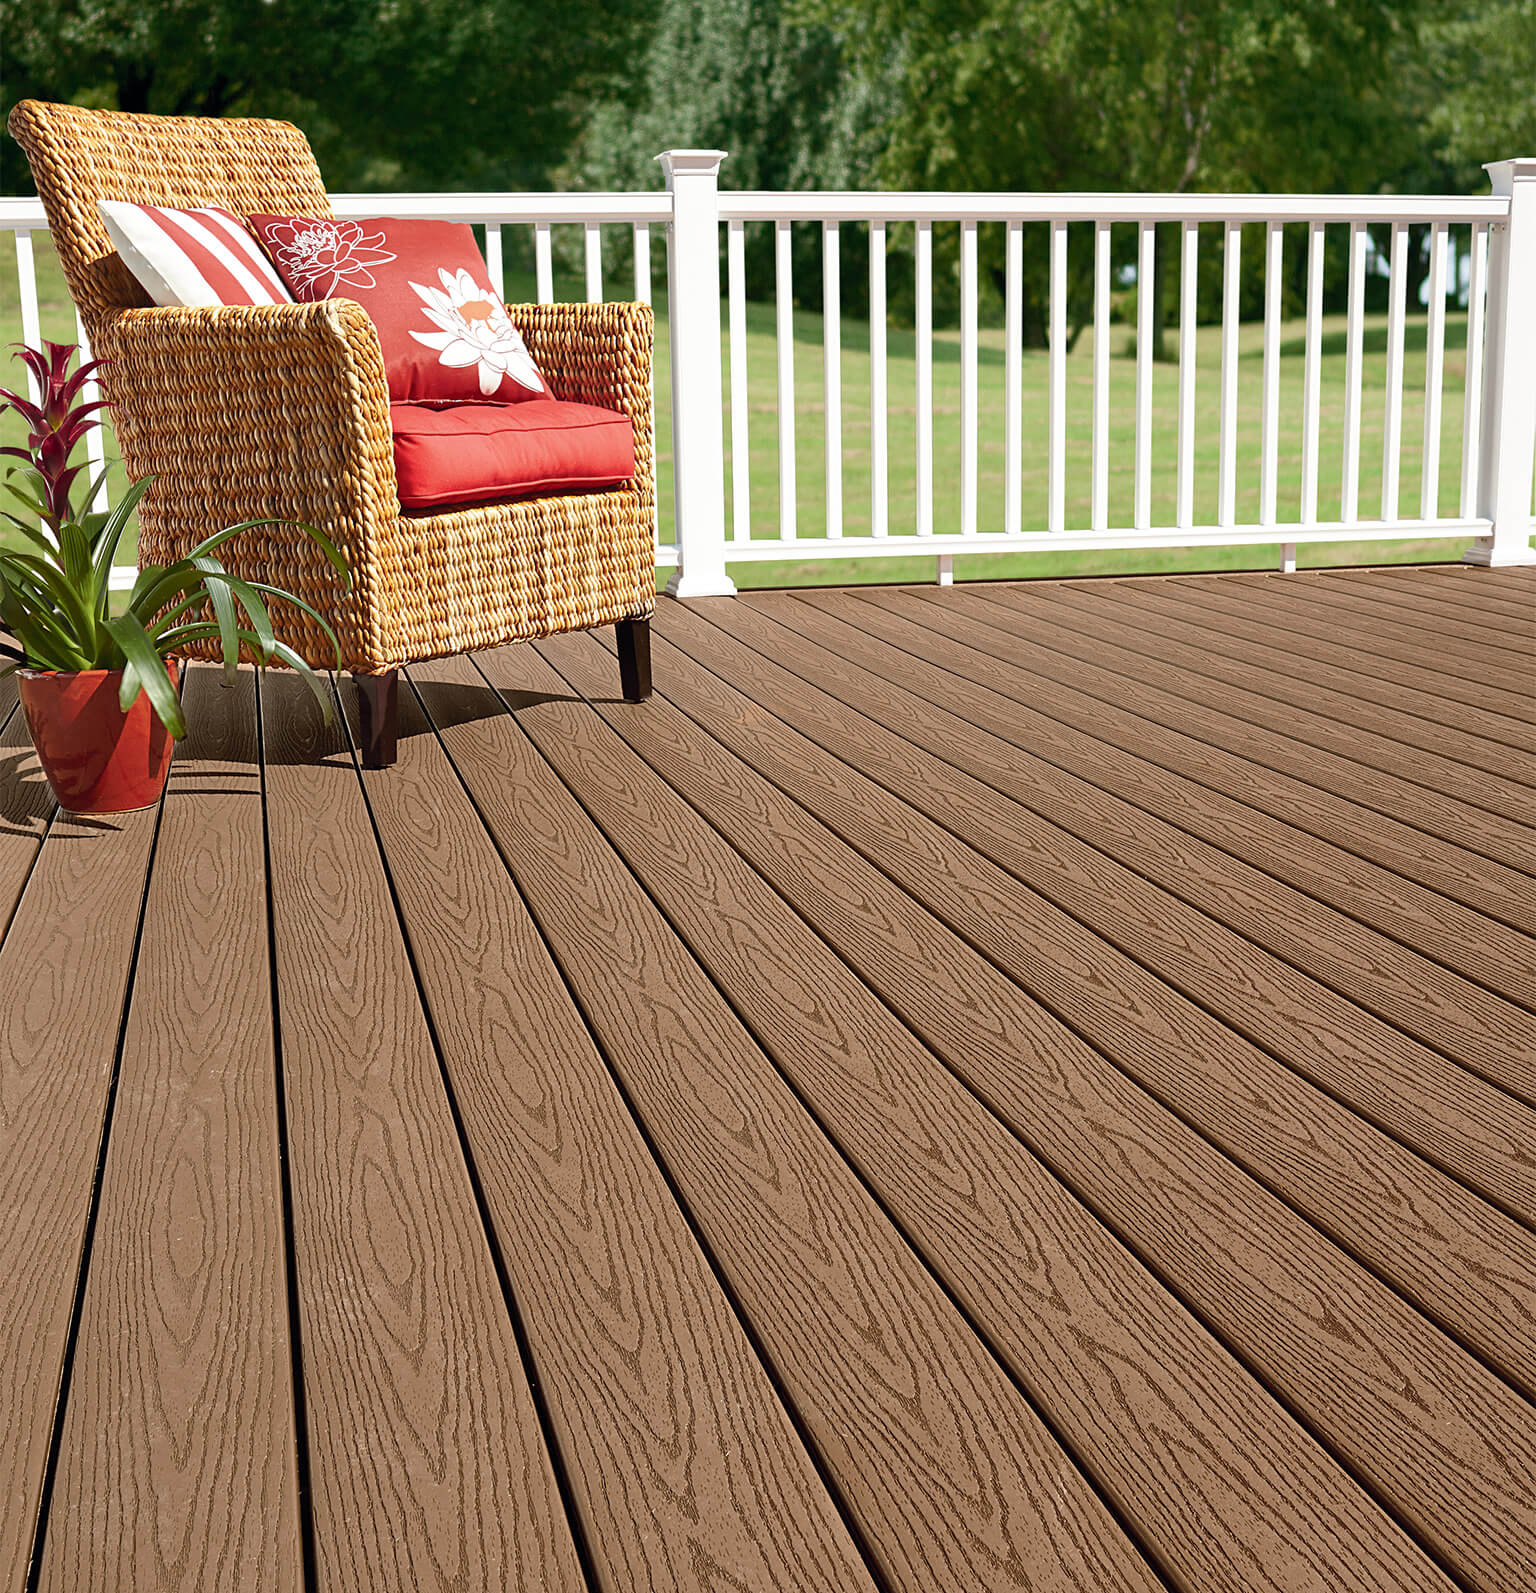 Another great looking synthetic product, a light tan shade of deck board used in a custom deck building project in Rochester NY.